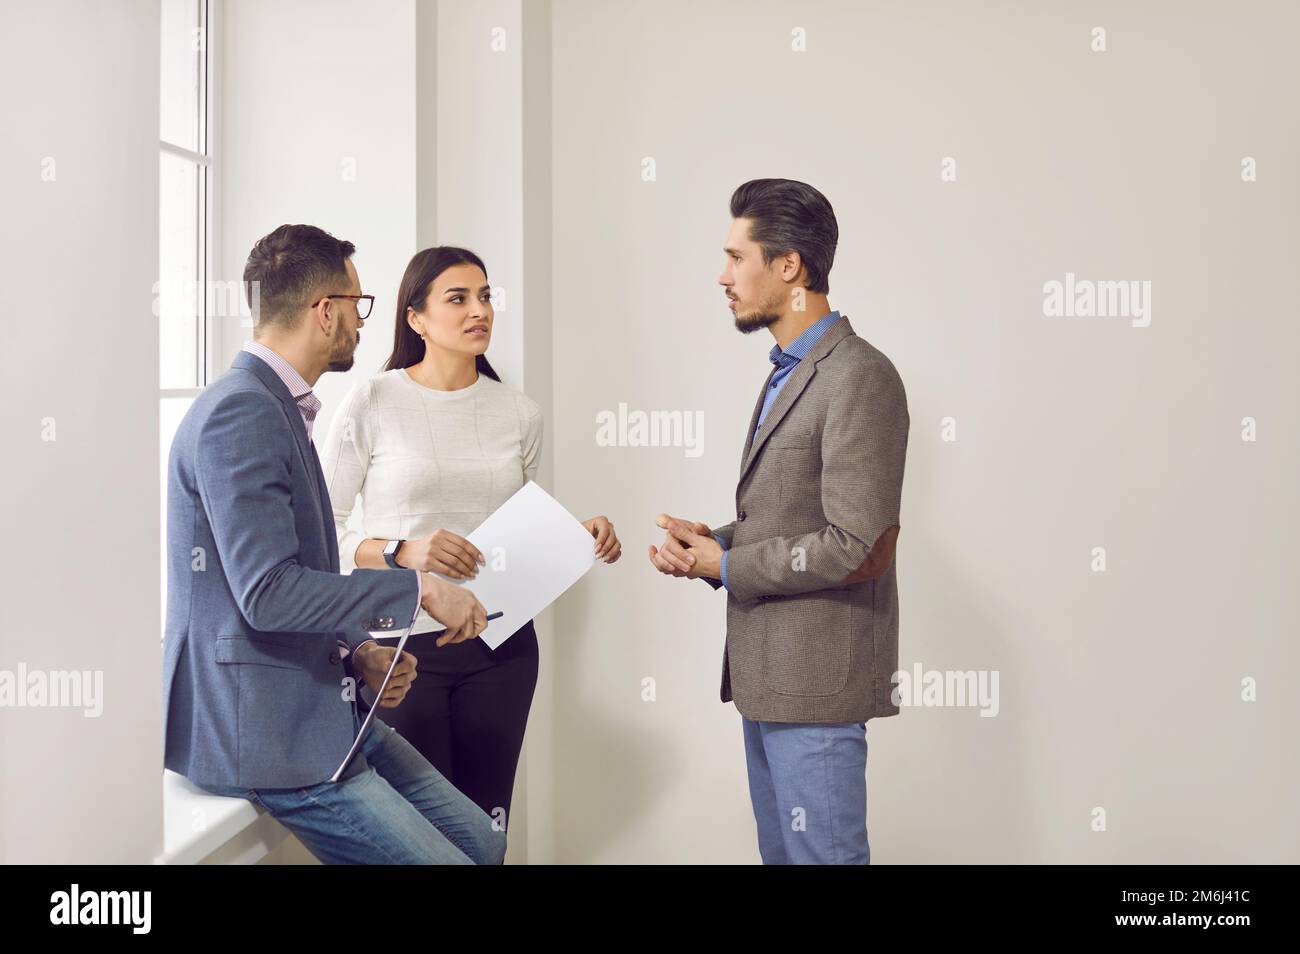 Group of three people having a discussion while standing together by an office window Stock Photo